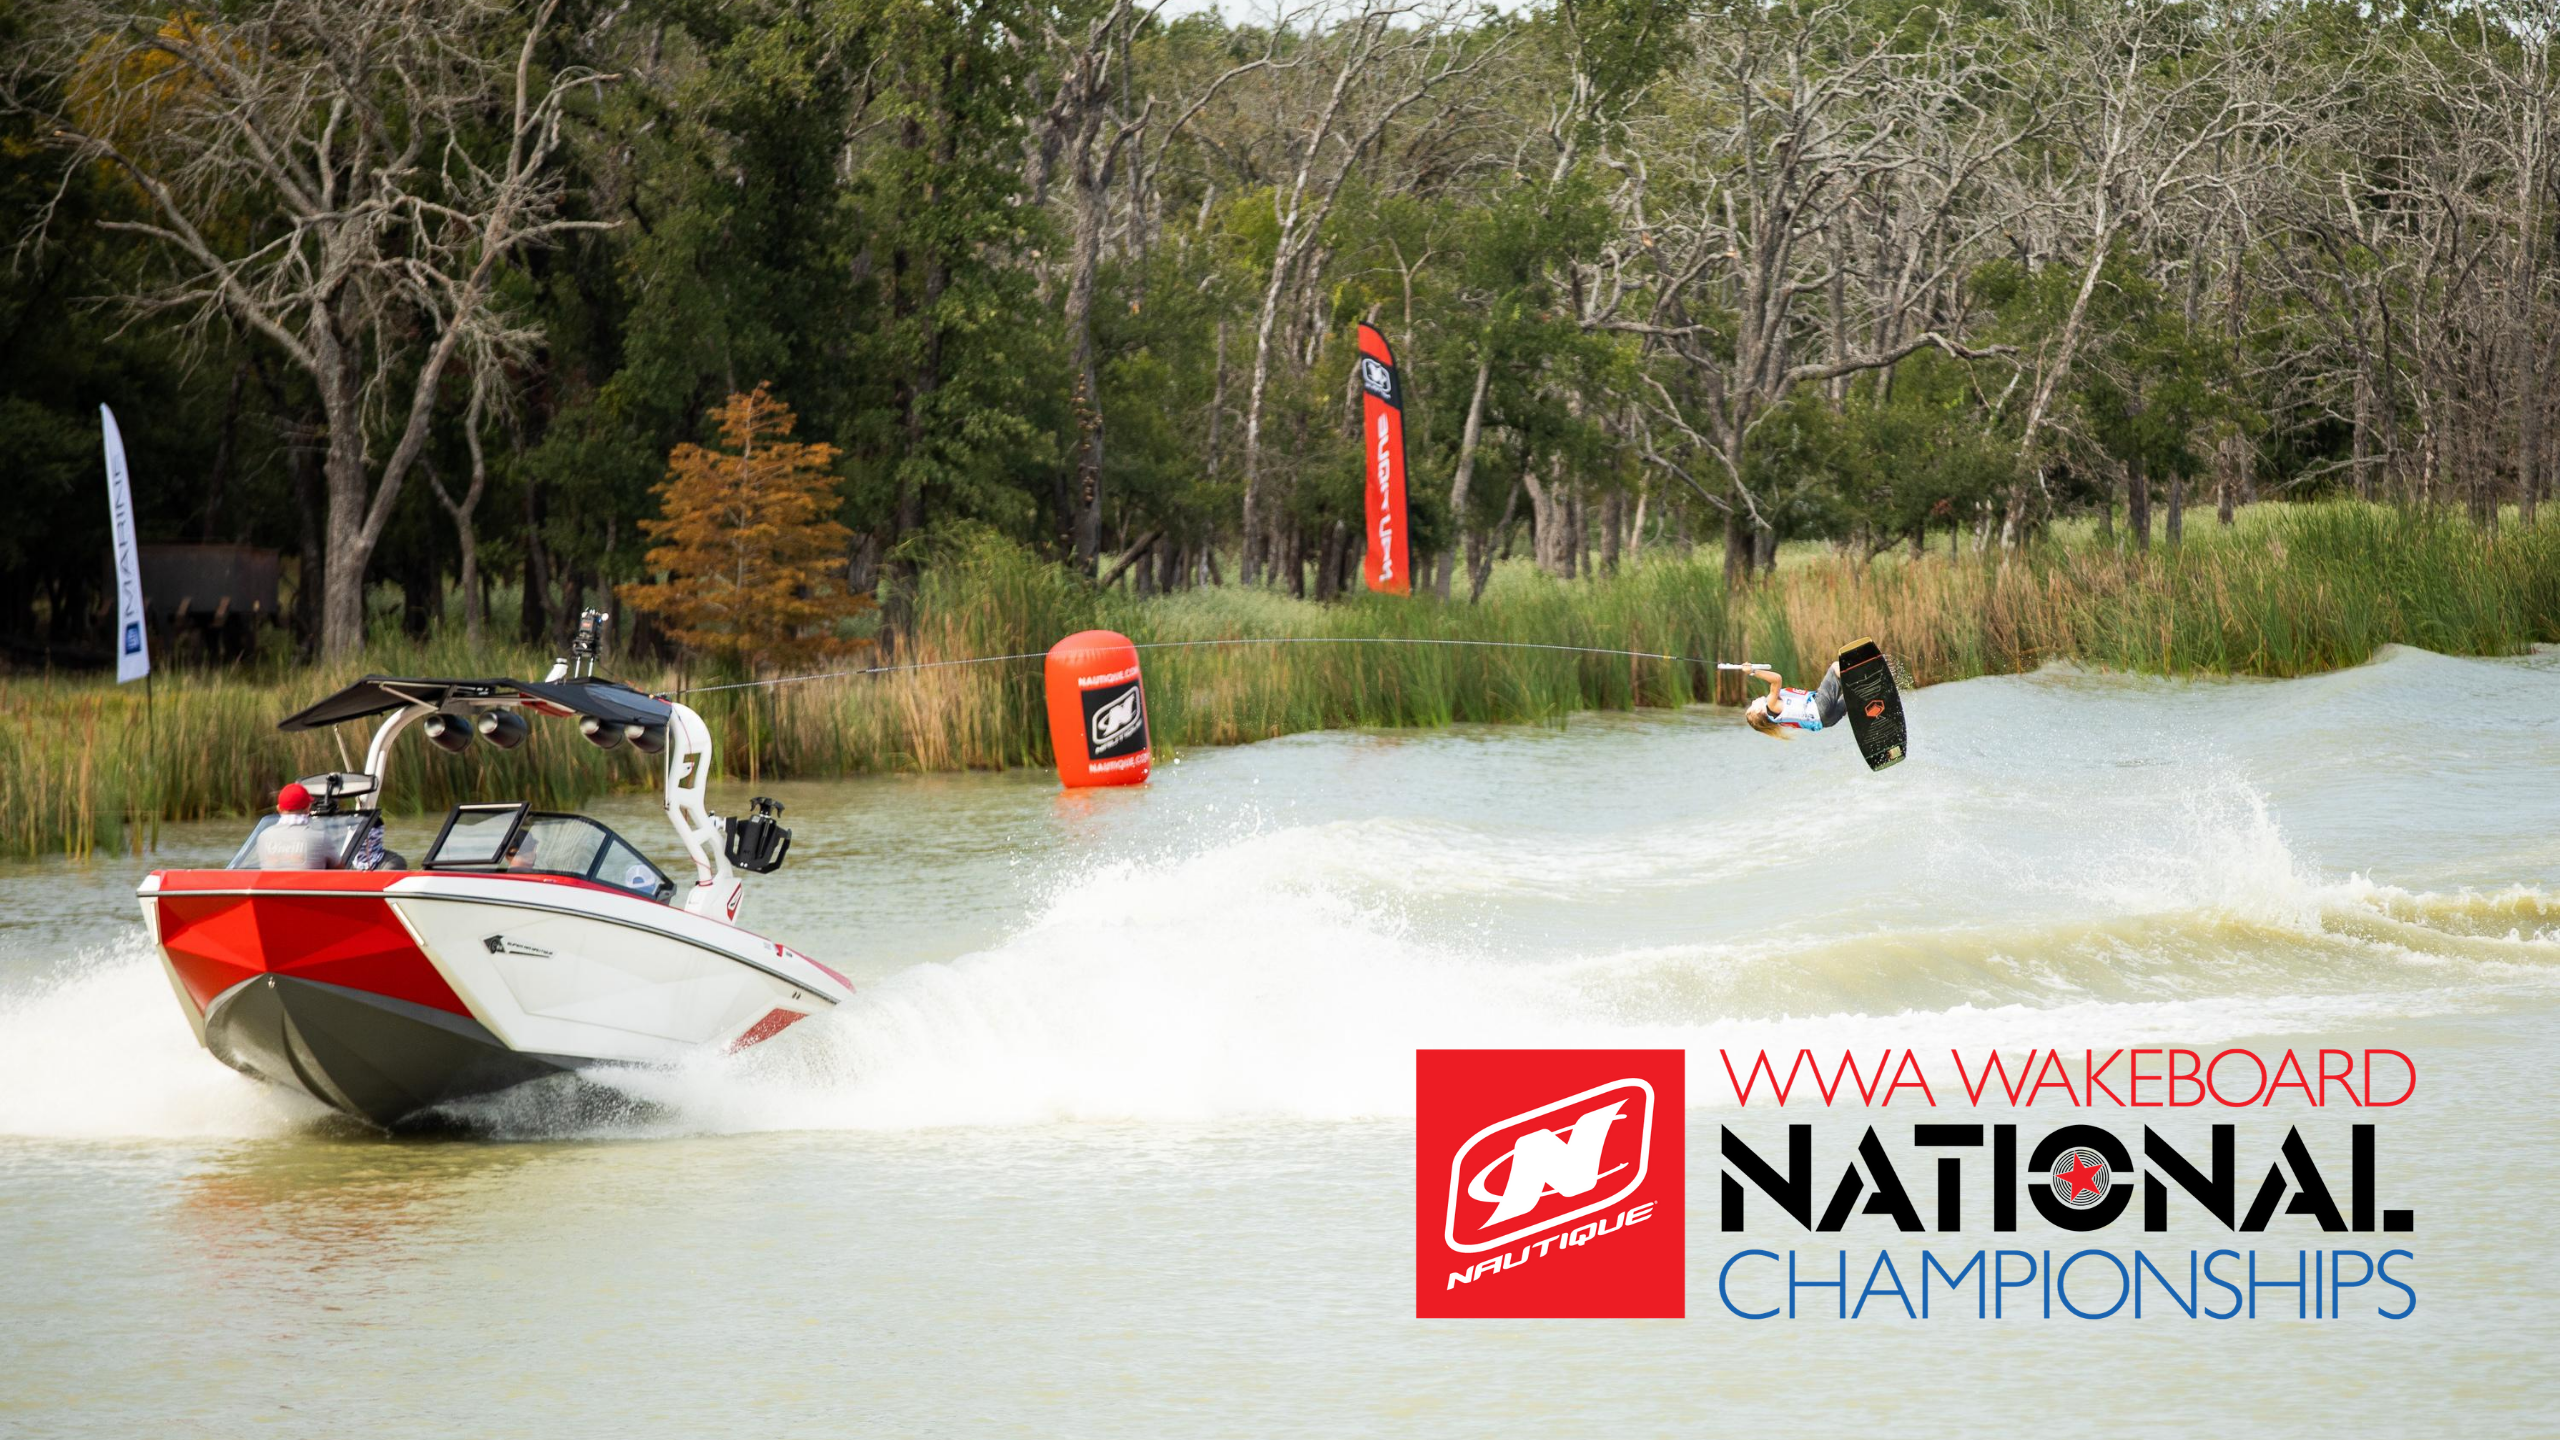 AMATEURS THROW DOWN ON DAY ONE OF THE 2020 NAUTIQUE WWA WAKEBOARD NATIONAL CHAMPIONSHIPS PRESENTED BY GM MARINE ENGINE TECHNOLOGY